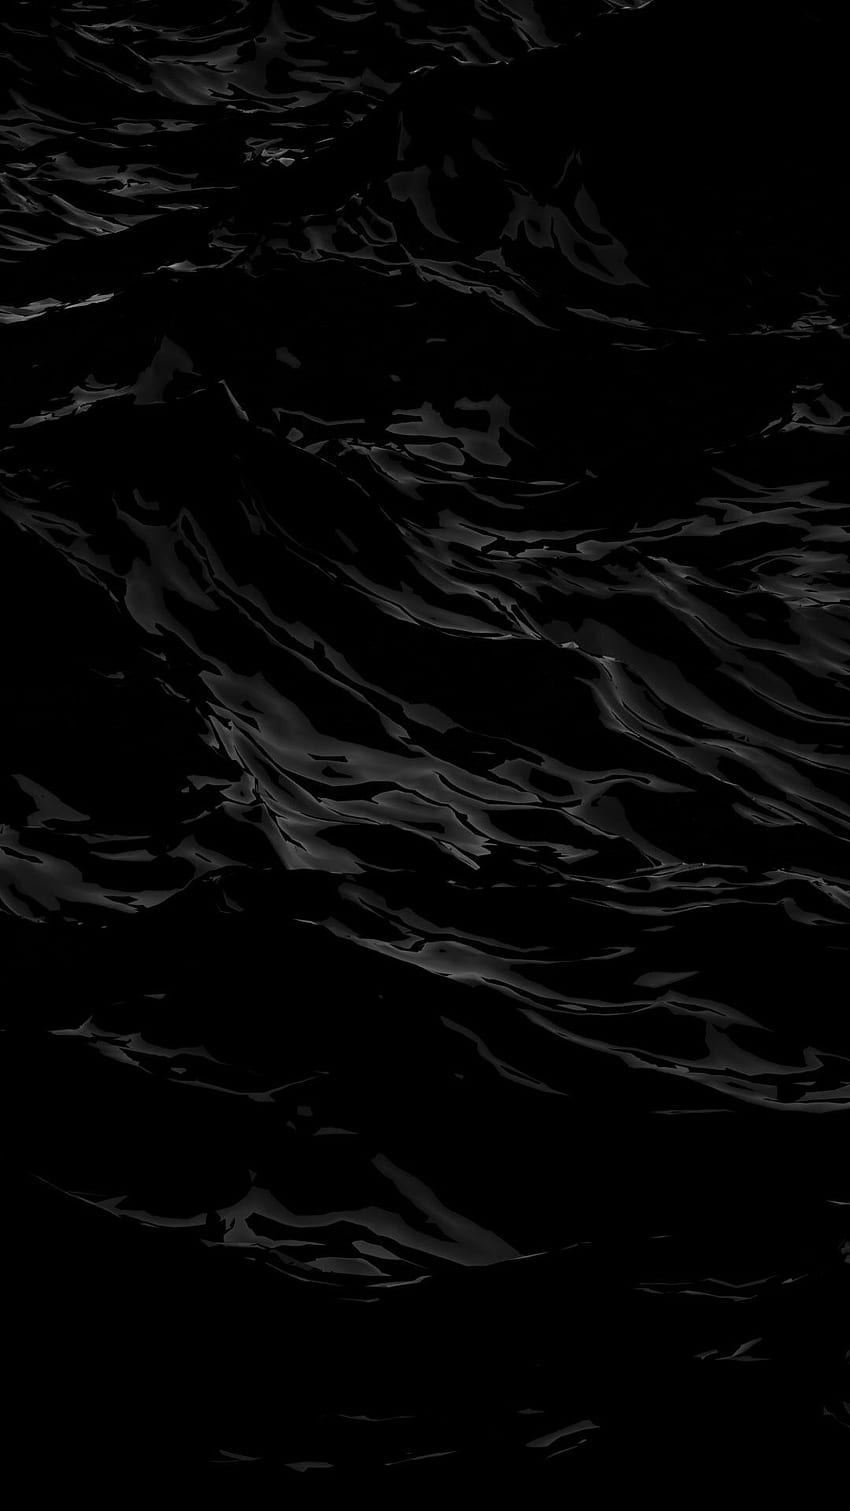 Download wallpaper 2560x1080 sea waves black surface water dual wide  1080p hd background